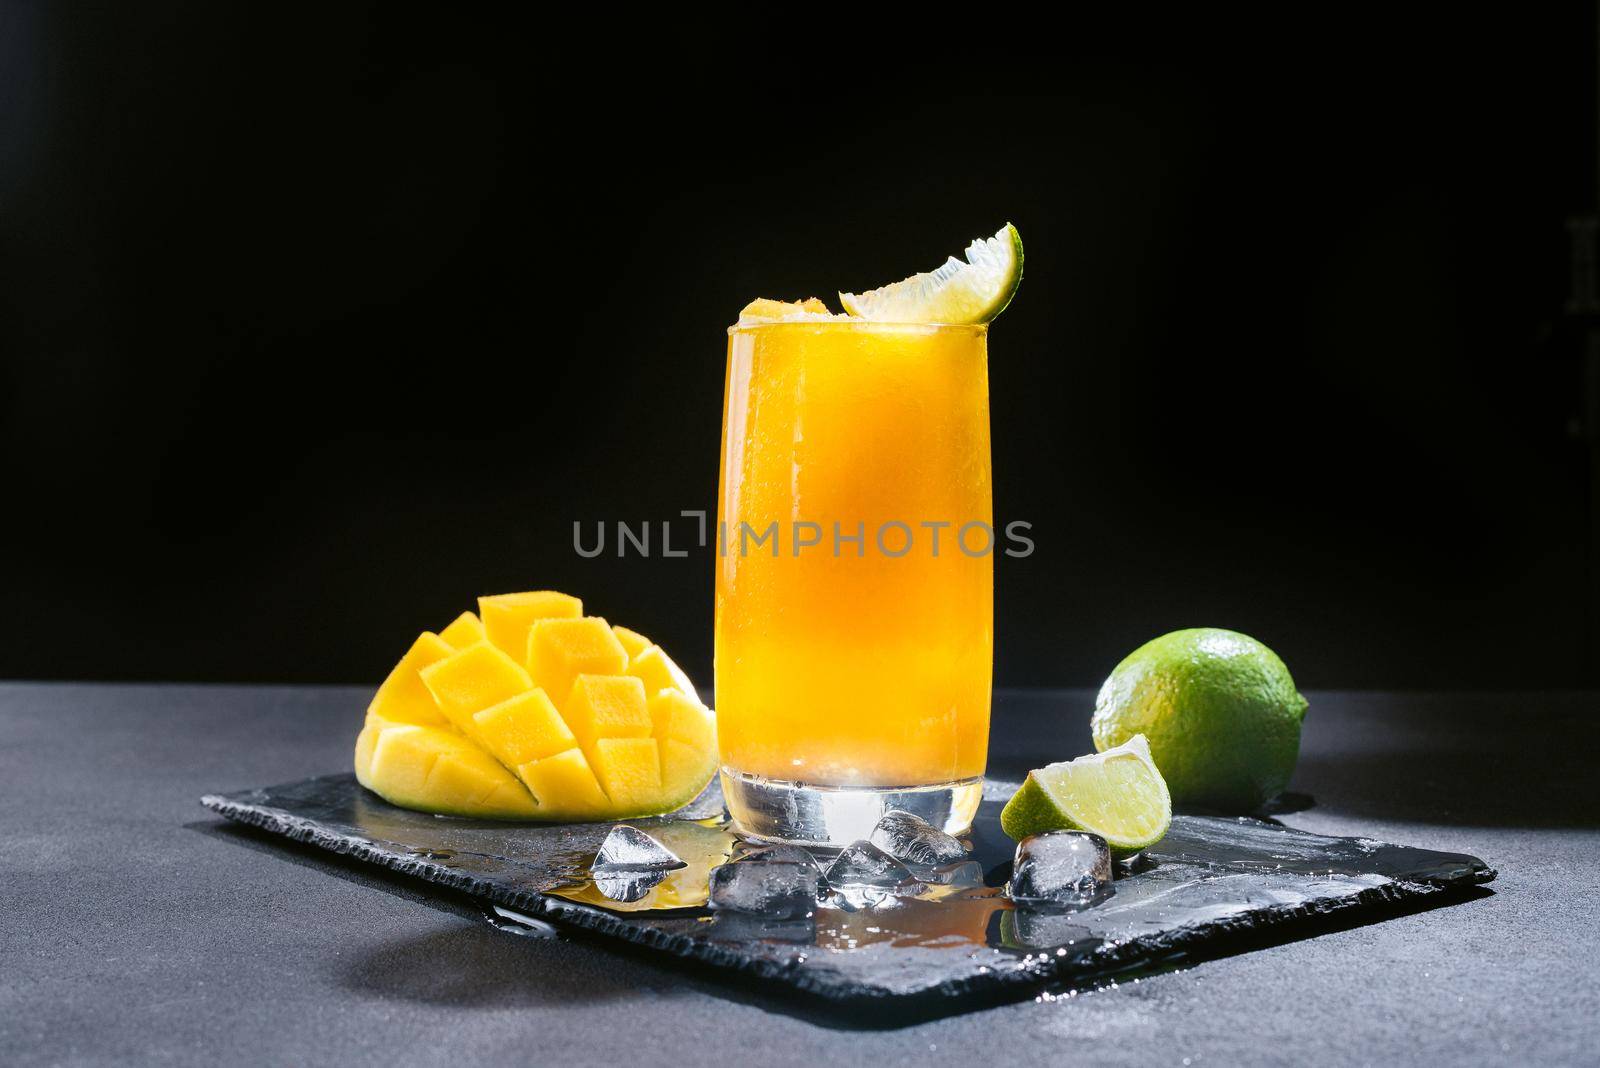 A Mexican smoothie drink made from mango, chili peppers, salt, and lime. A refreshing summer smoothie on a black background of bright orange